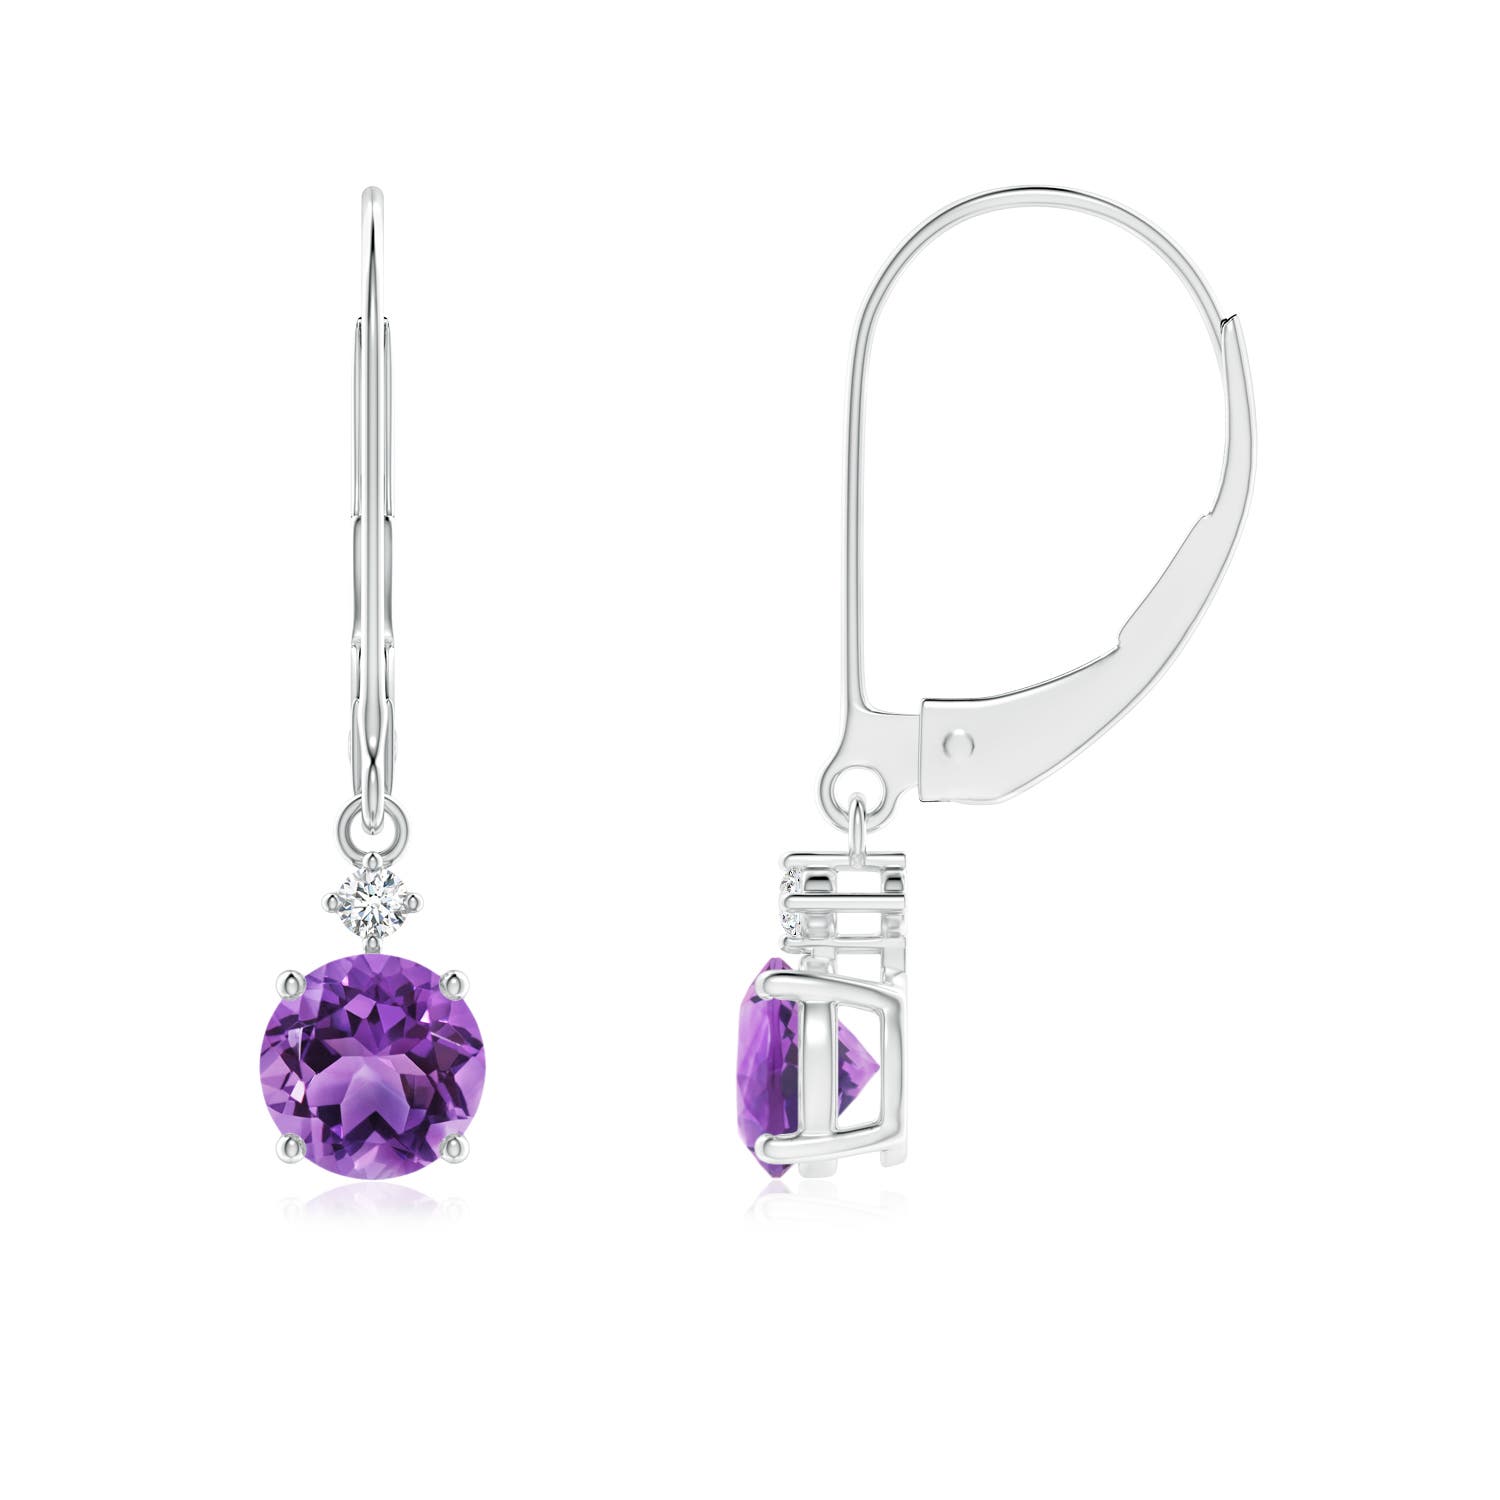 AA - Amethyst / 0.94 CT / 14 KT White Gold